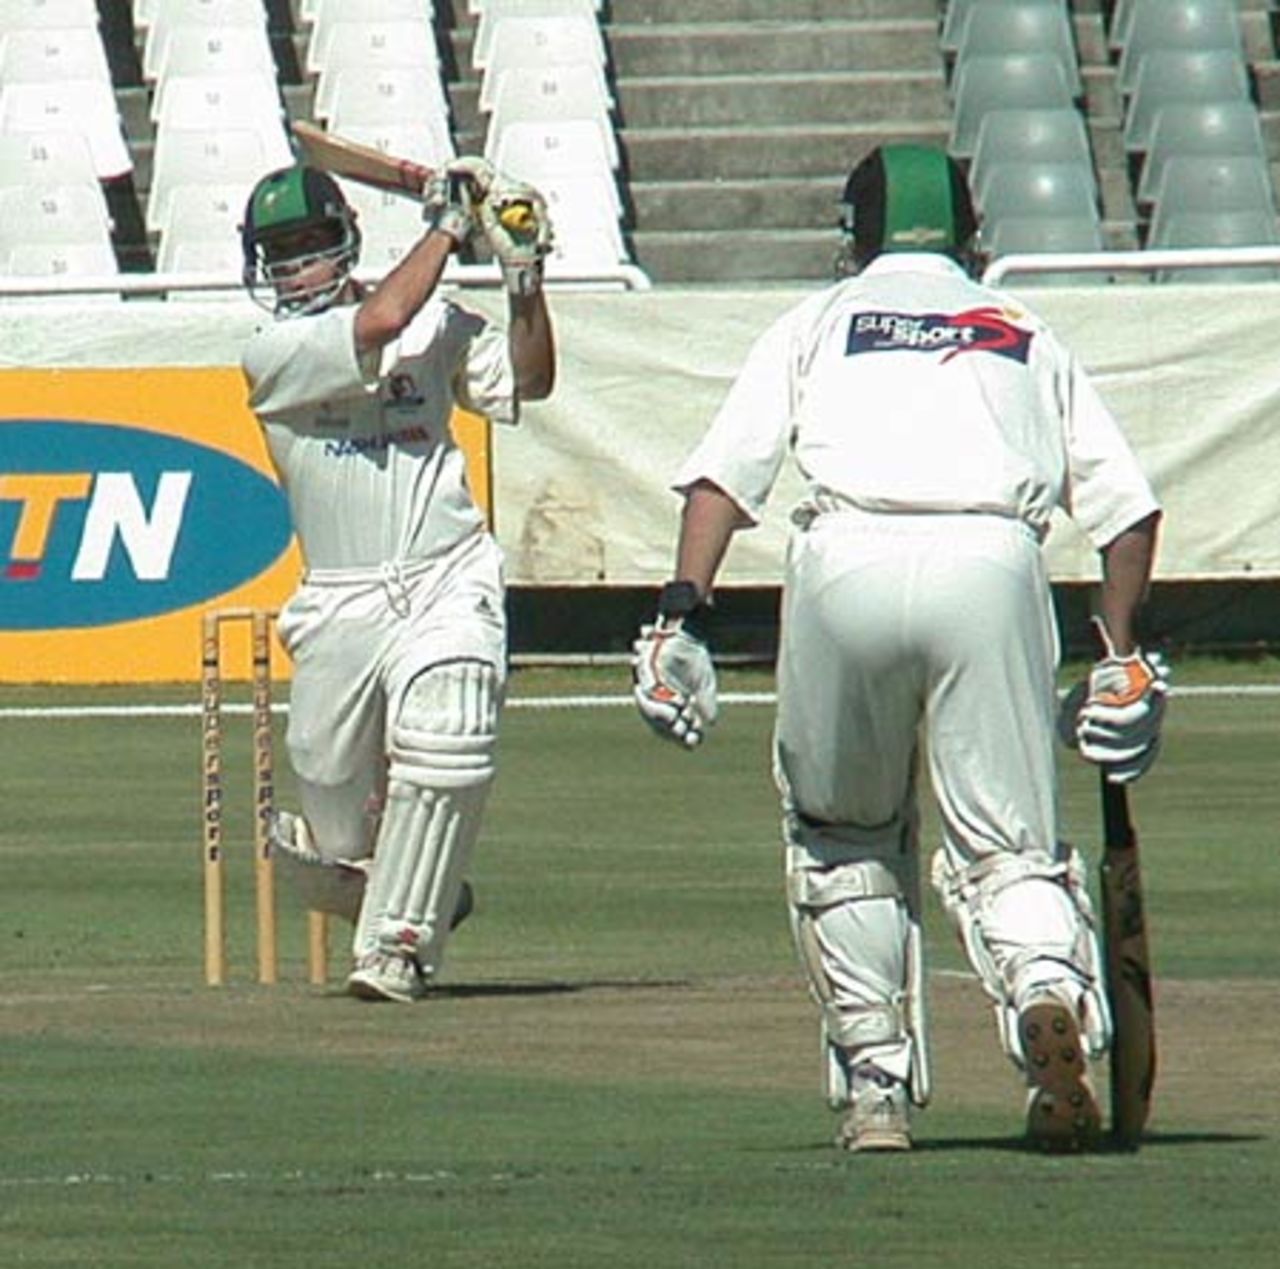 KZN captain Dale Benkenstein drives a ball to the cover point boundary in a Supersport Series match at Newlands on Saturday